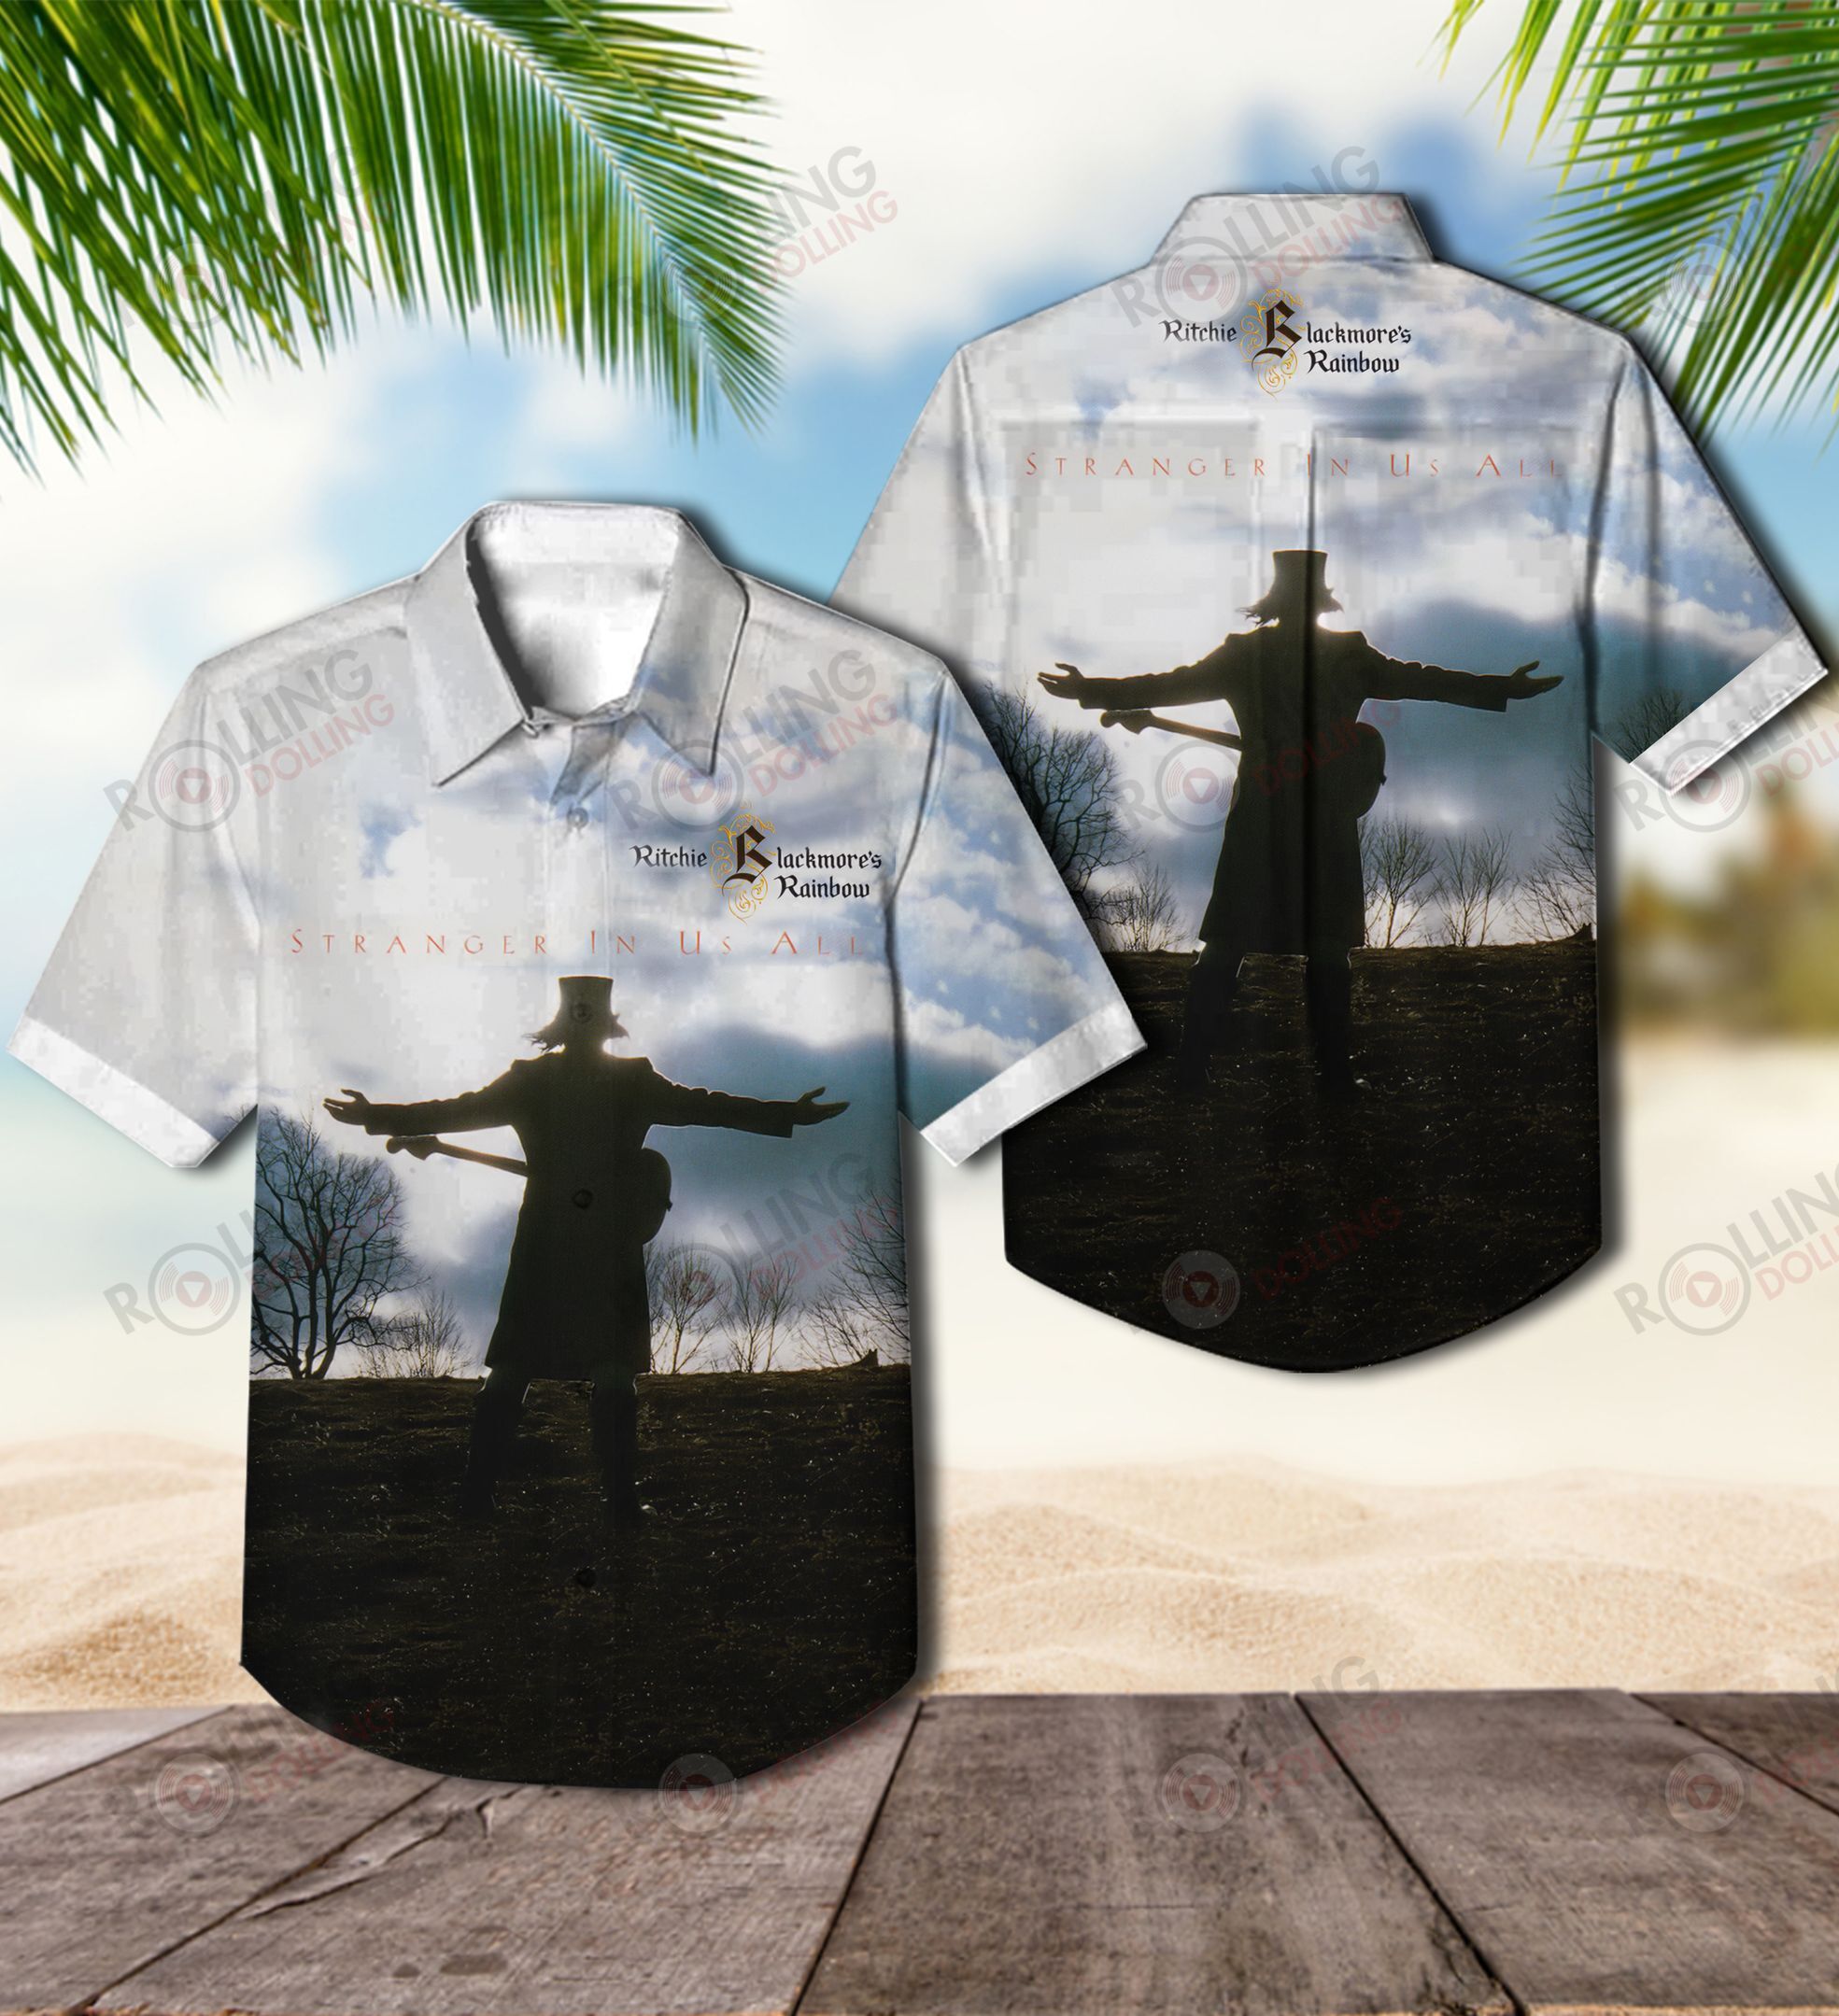 The Hawaiian Shirt is a popular shirt that is worn by Rock band fans 20